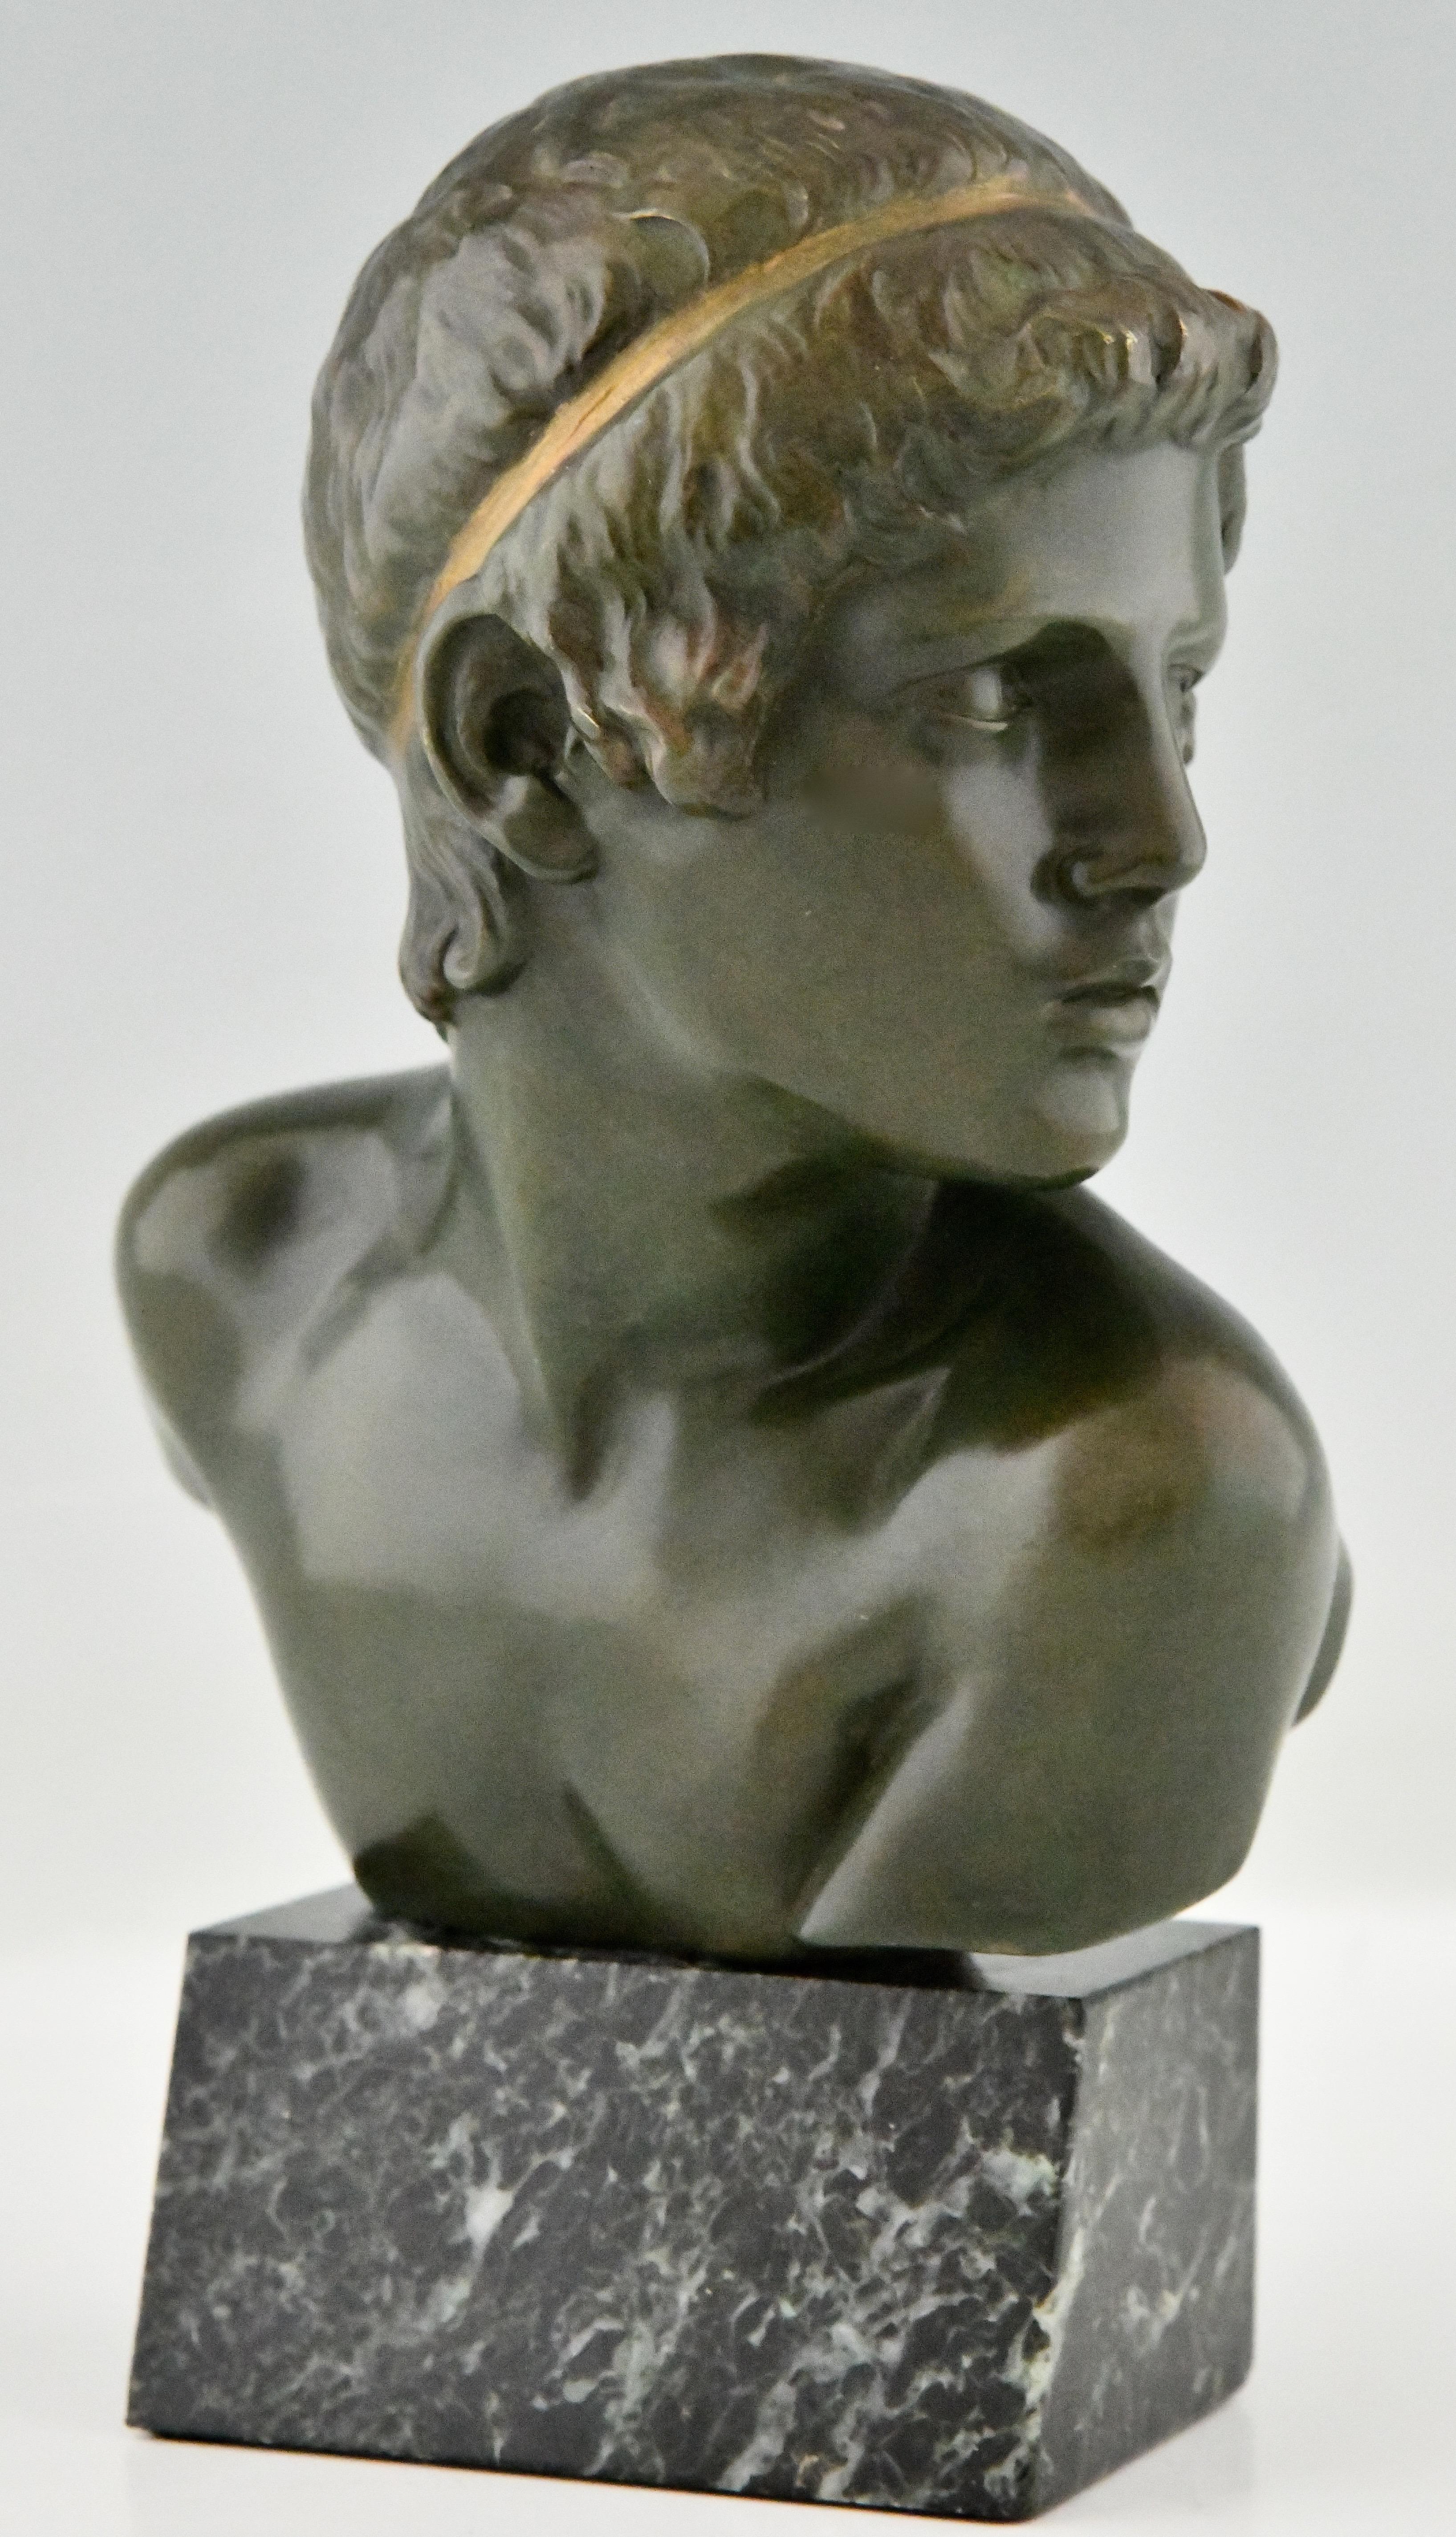 Art Deco bronze sculpture bust young Achilles. 
The bronze bust is signed by Constant Roux.
The sculpture stands on a green marble base.
France 1920. 
This model is illustrated in the book Constant Roux by Laurent Noet, Mare & Martin on page 45